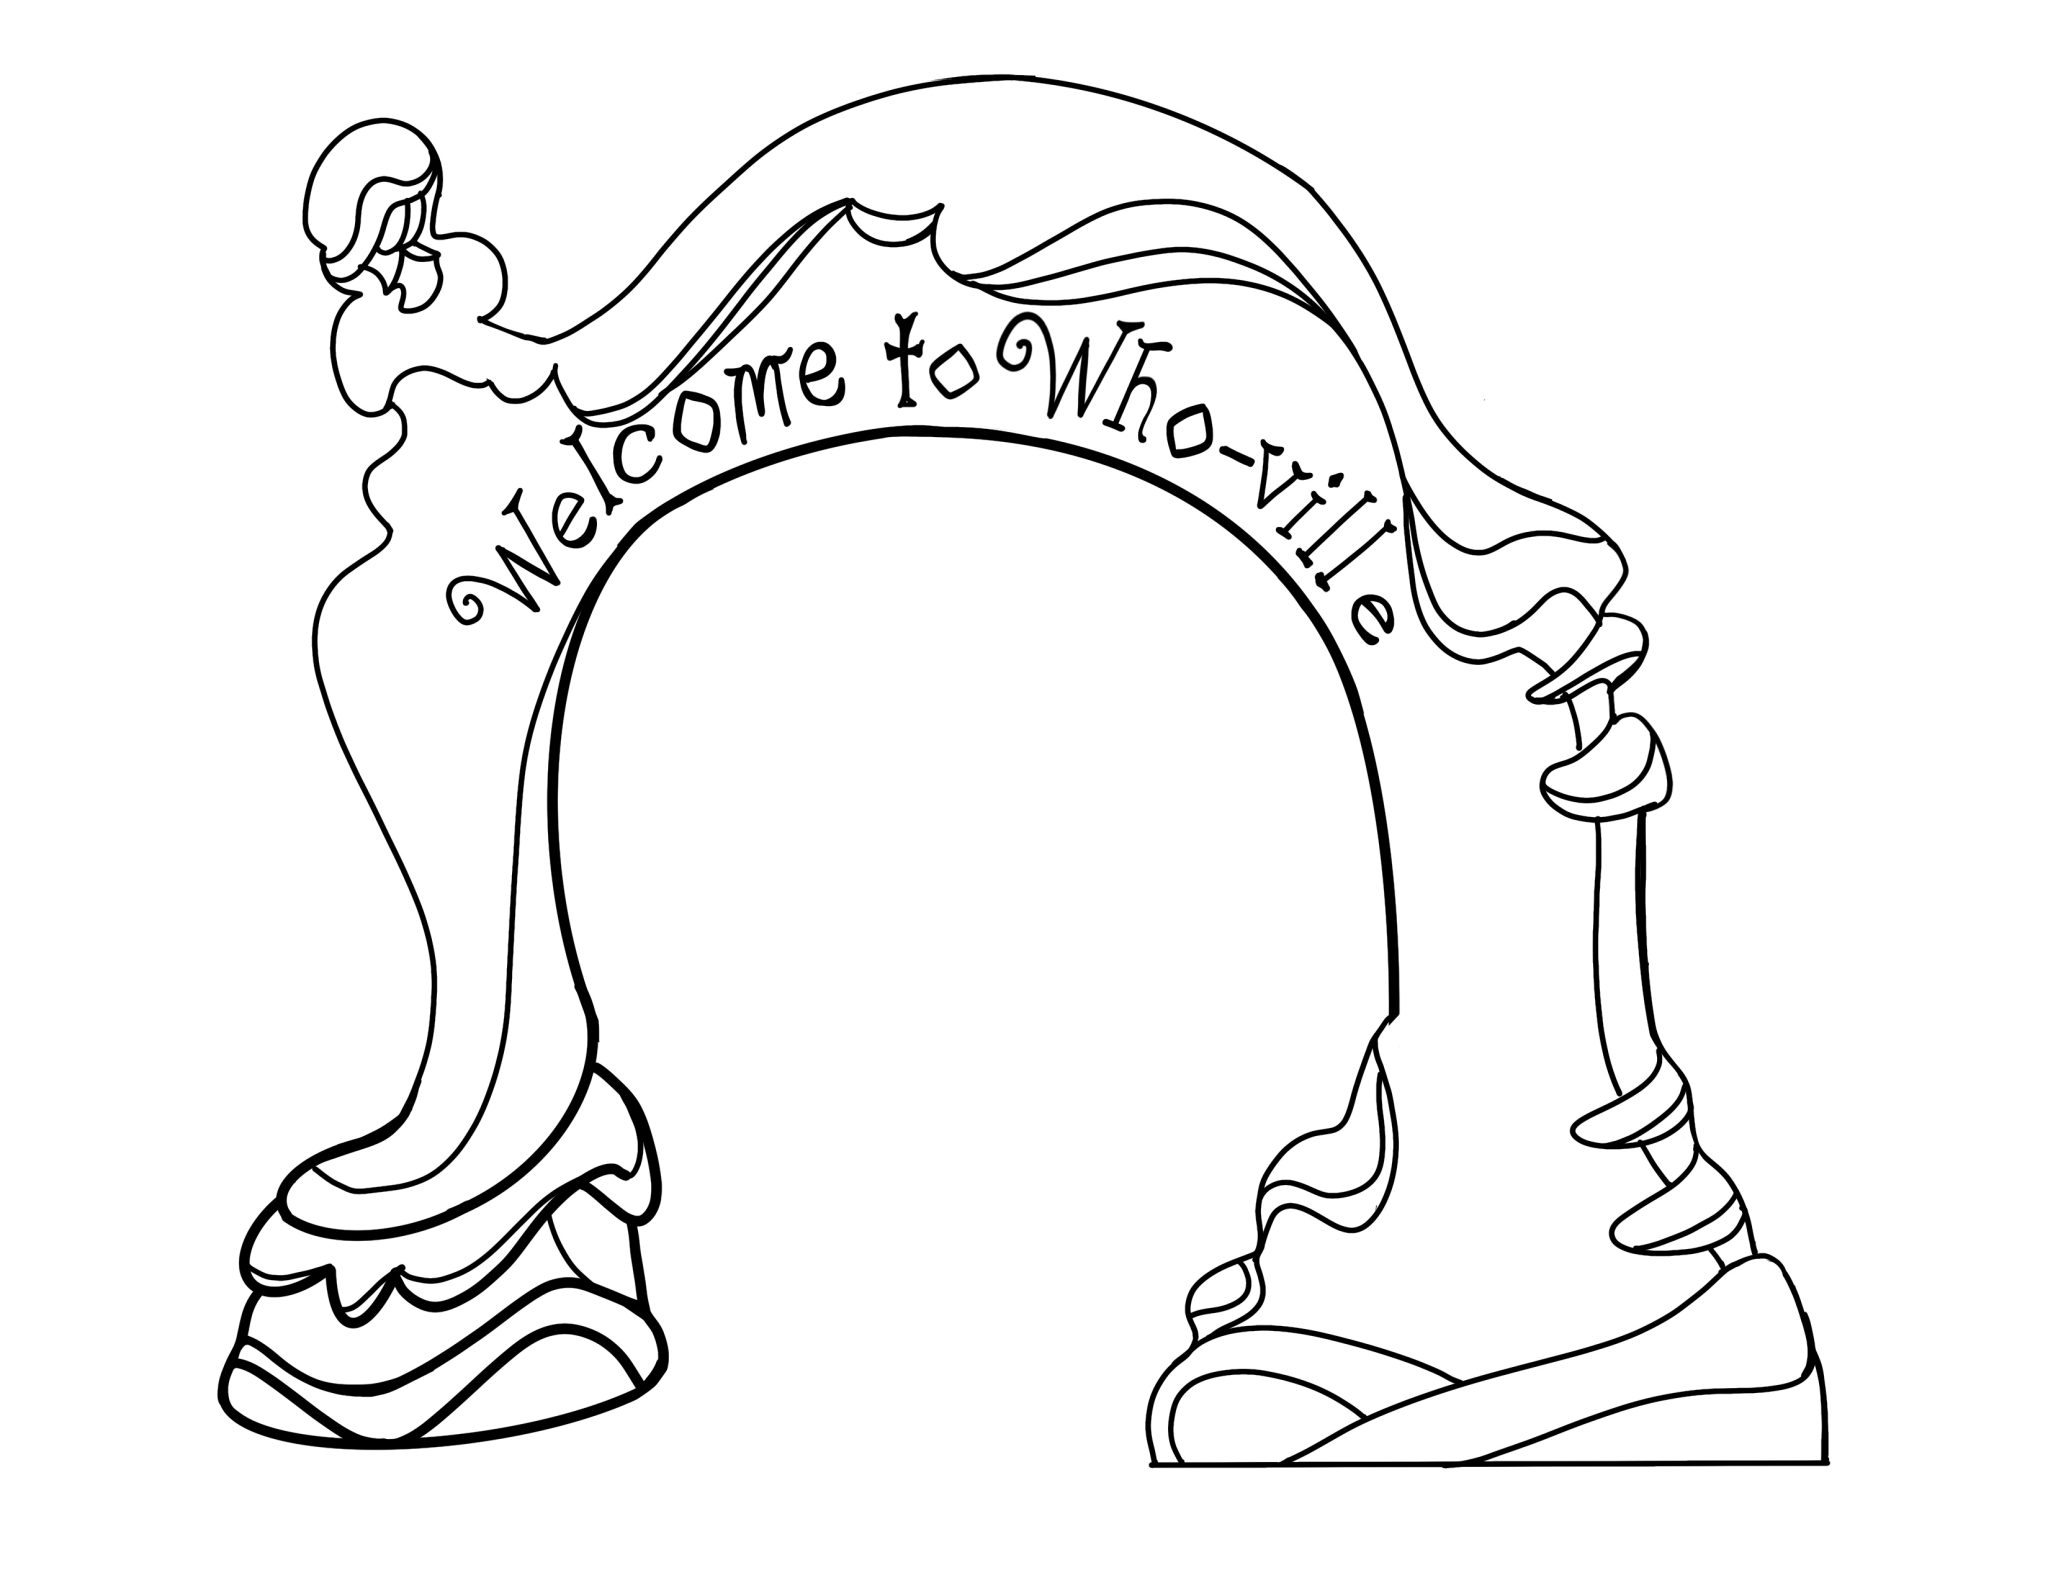 DIY Welcome to Whoville Template Highlights Along the Way